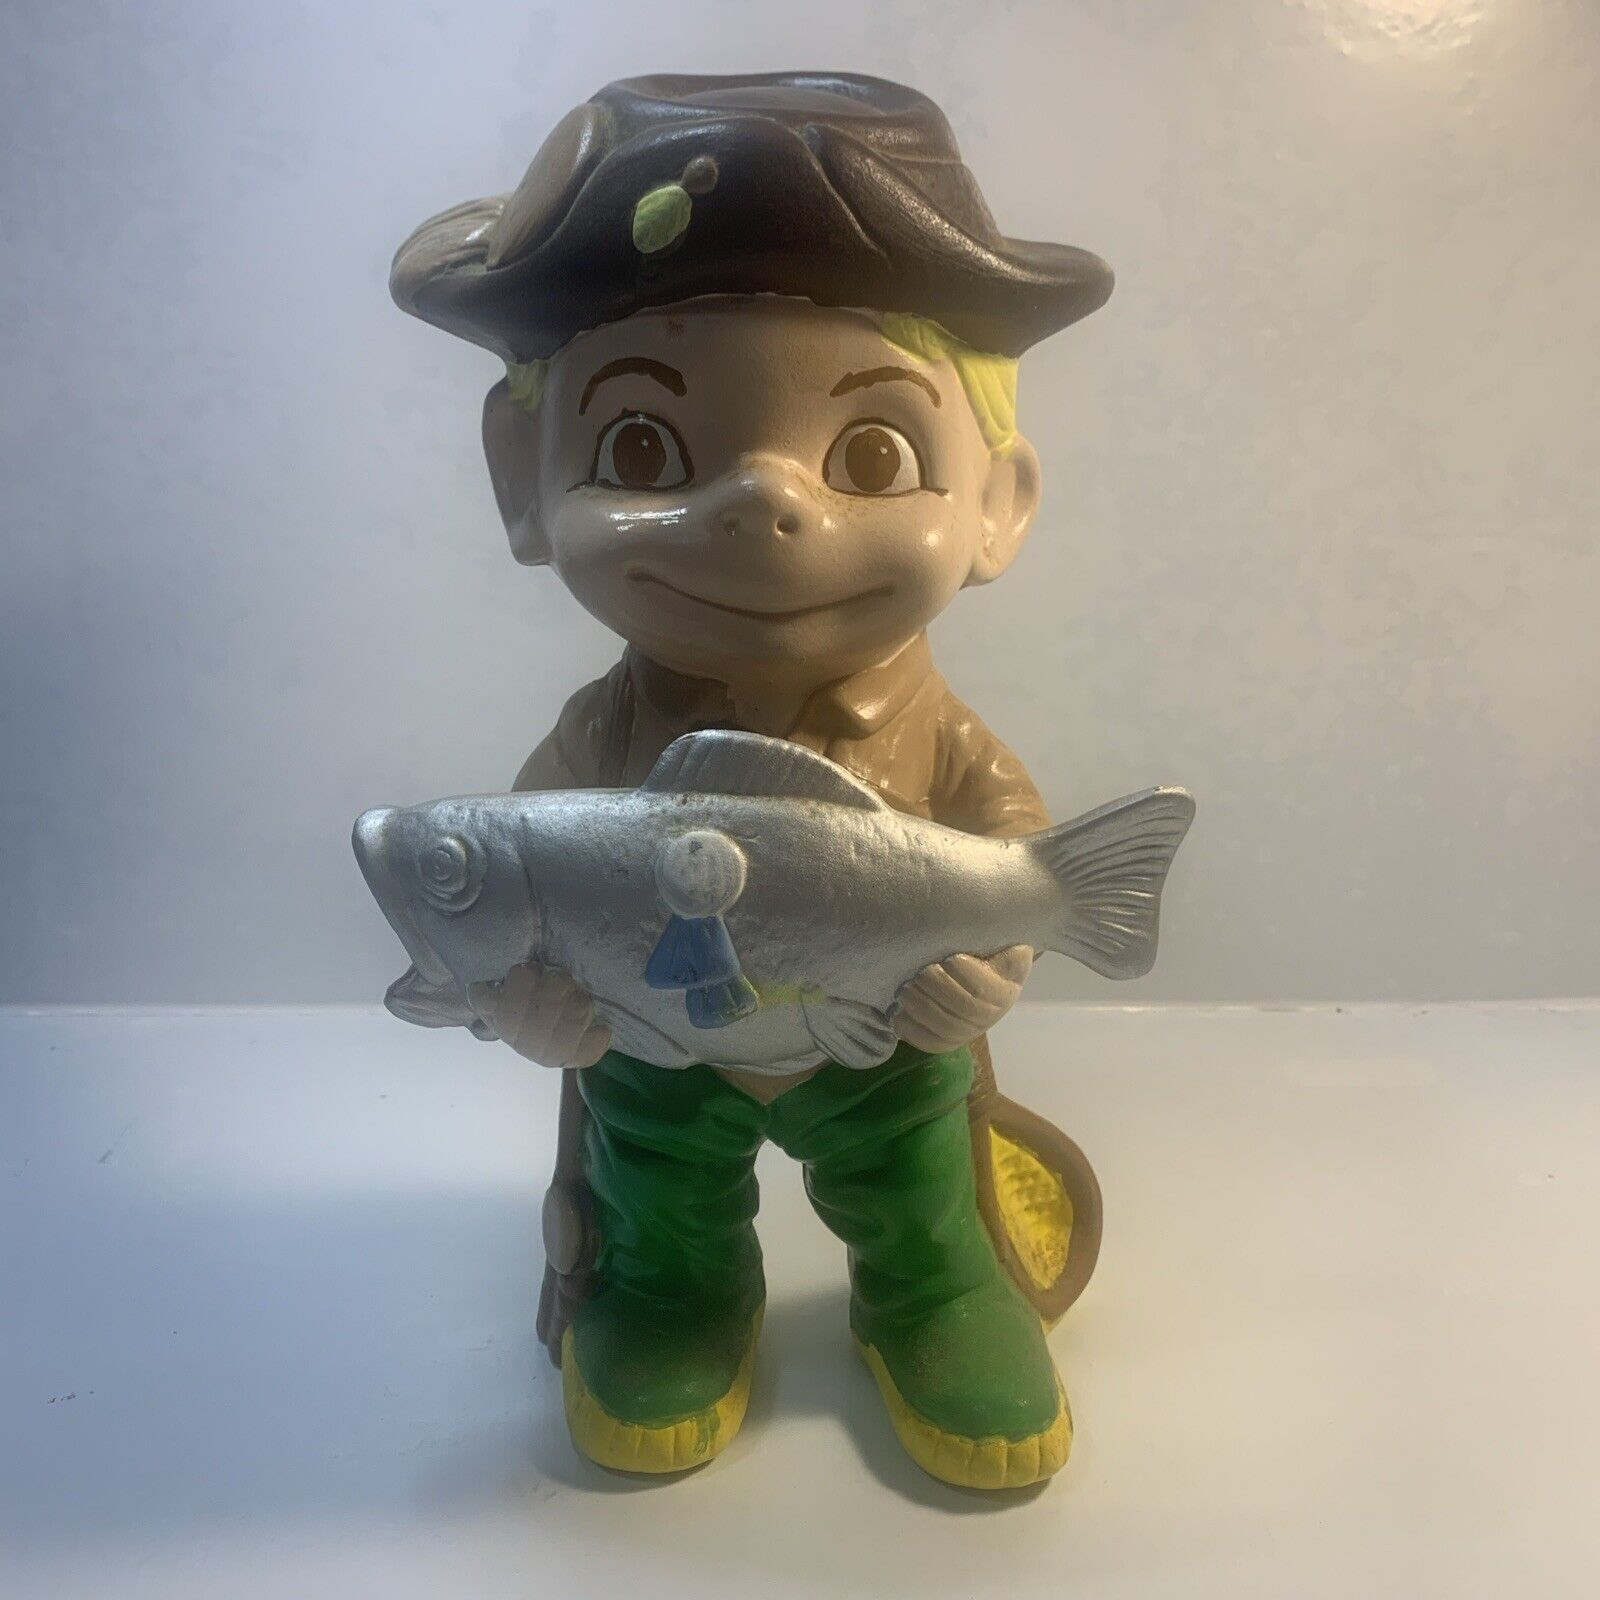 Vintage ATLANTIC MOLD CERAMIC Smiley Boy 1st Place Fish fisherman hand painted 